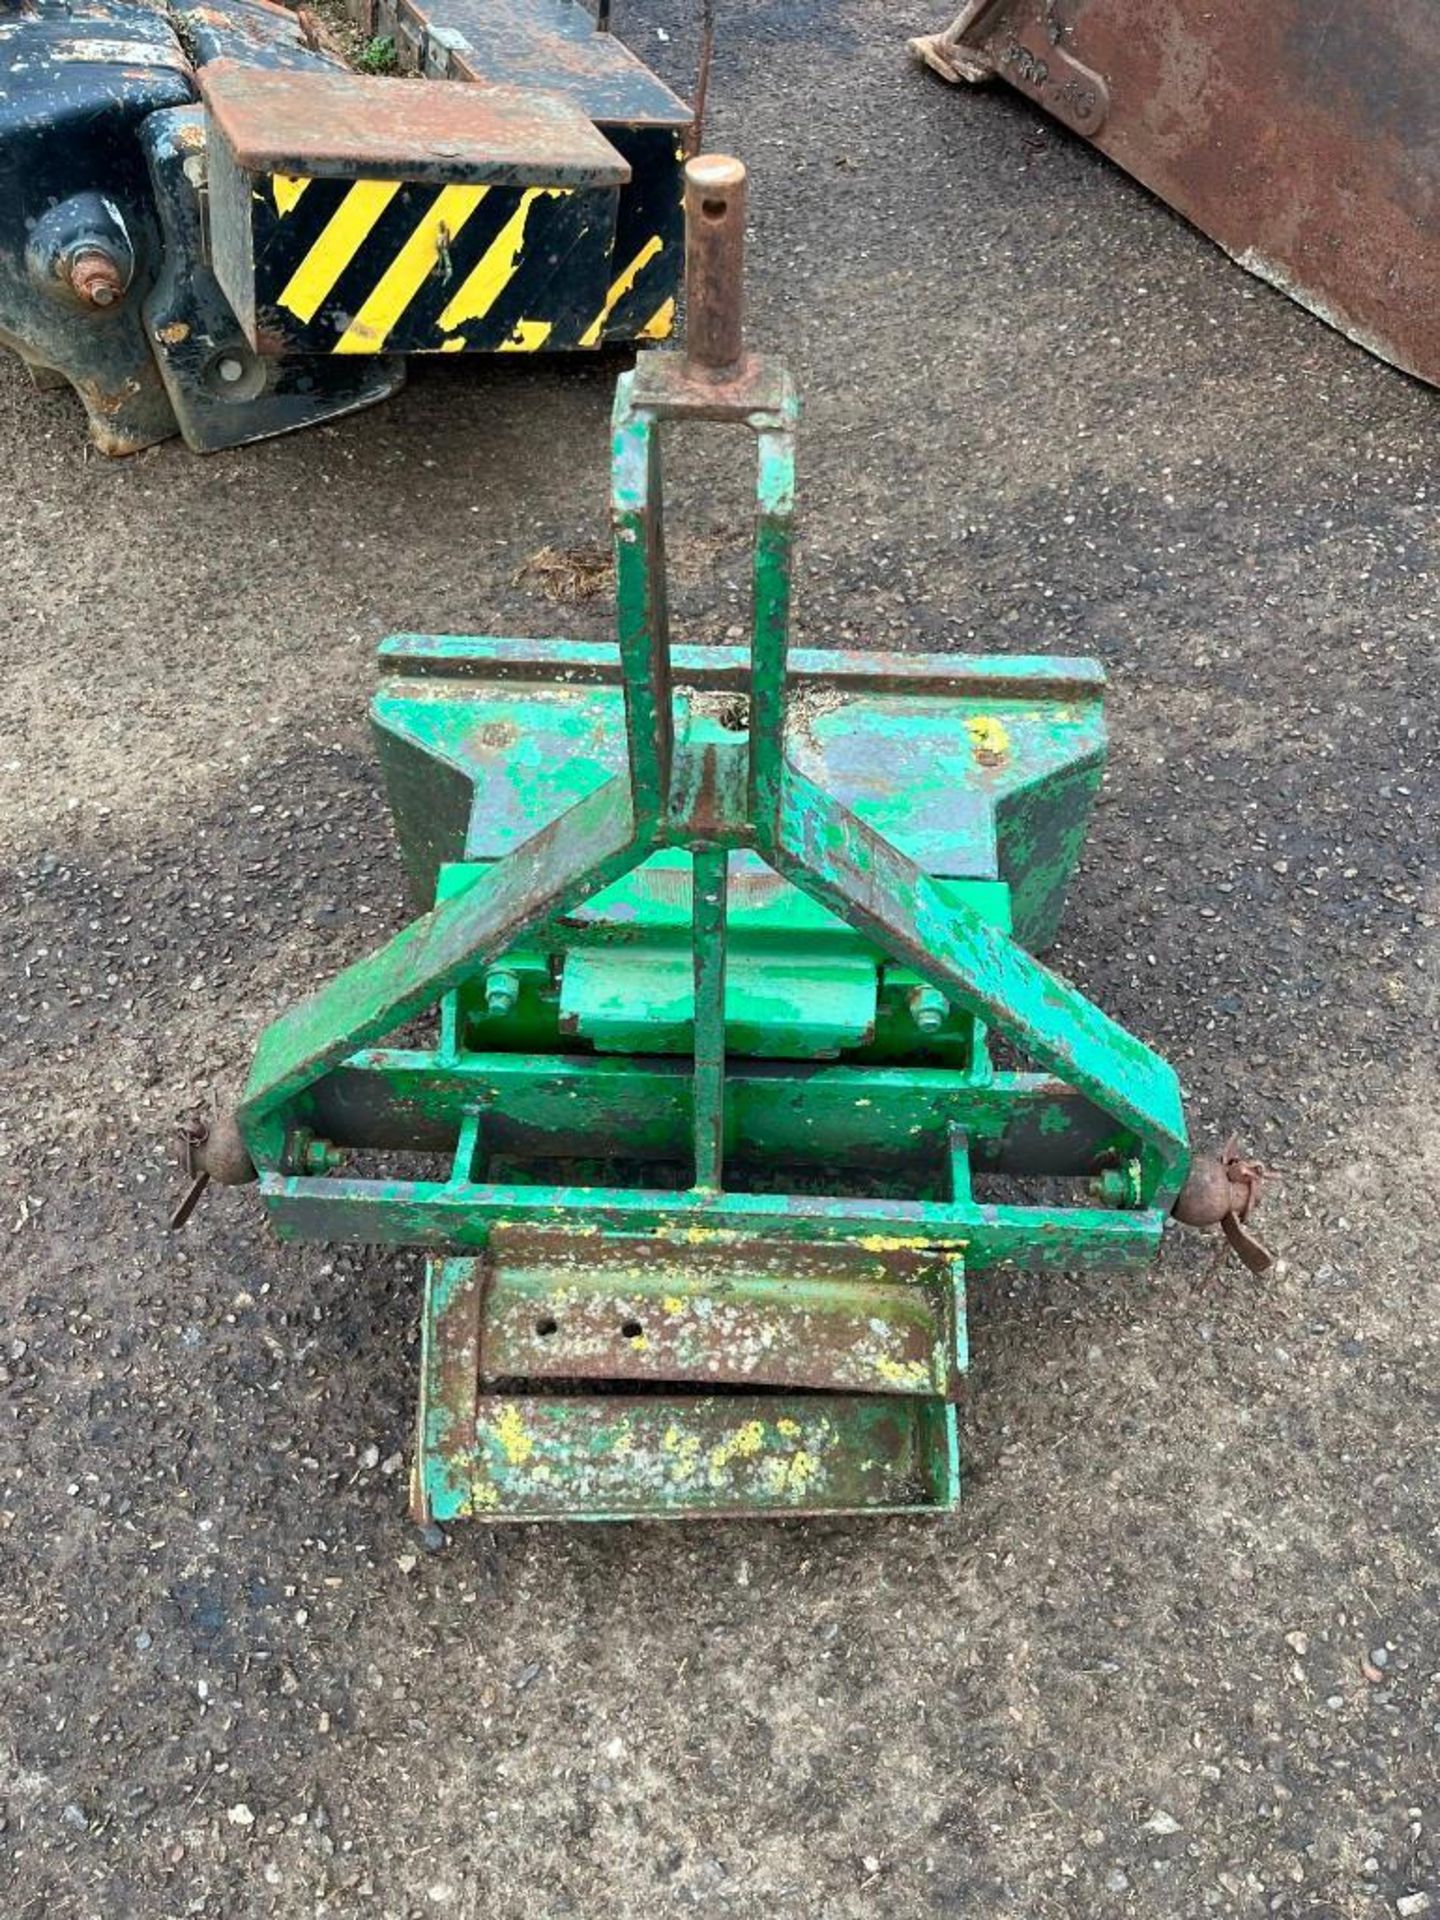 Renault 566Kg 3 Point Linkage Weight Block - Image 5 of 5